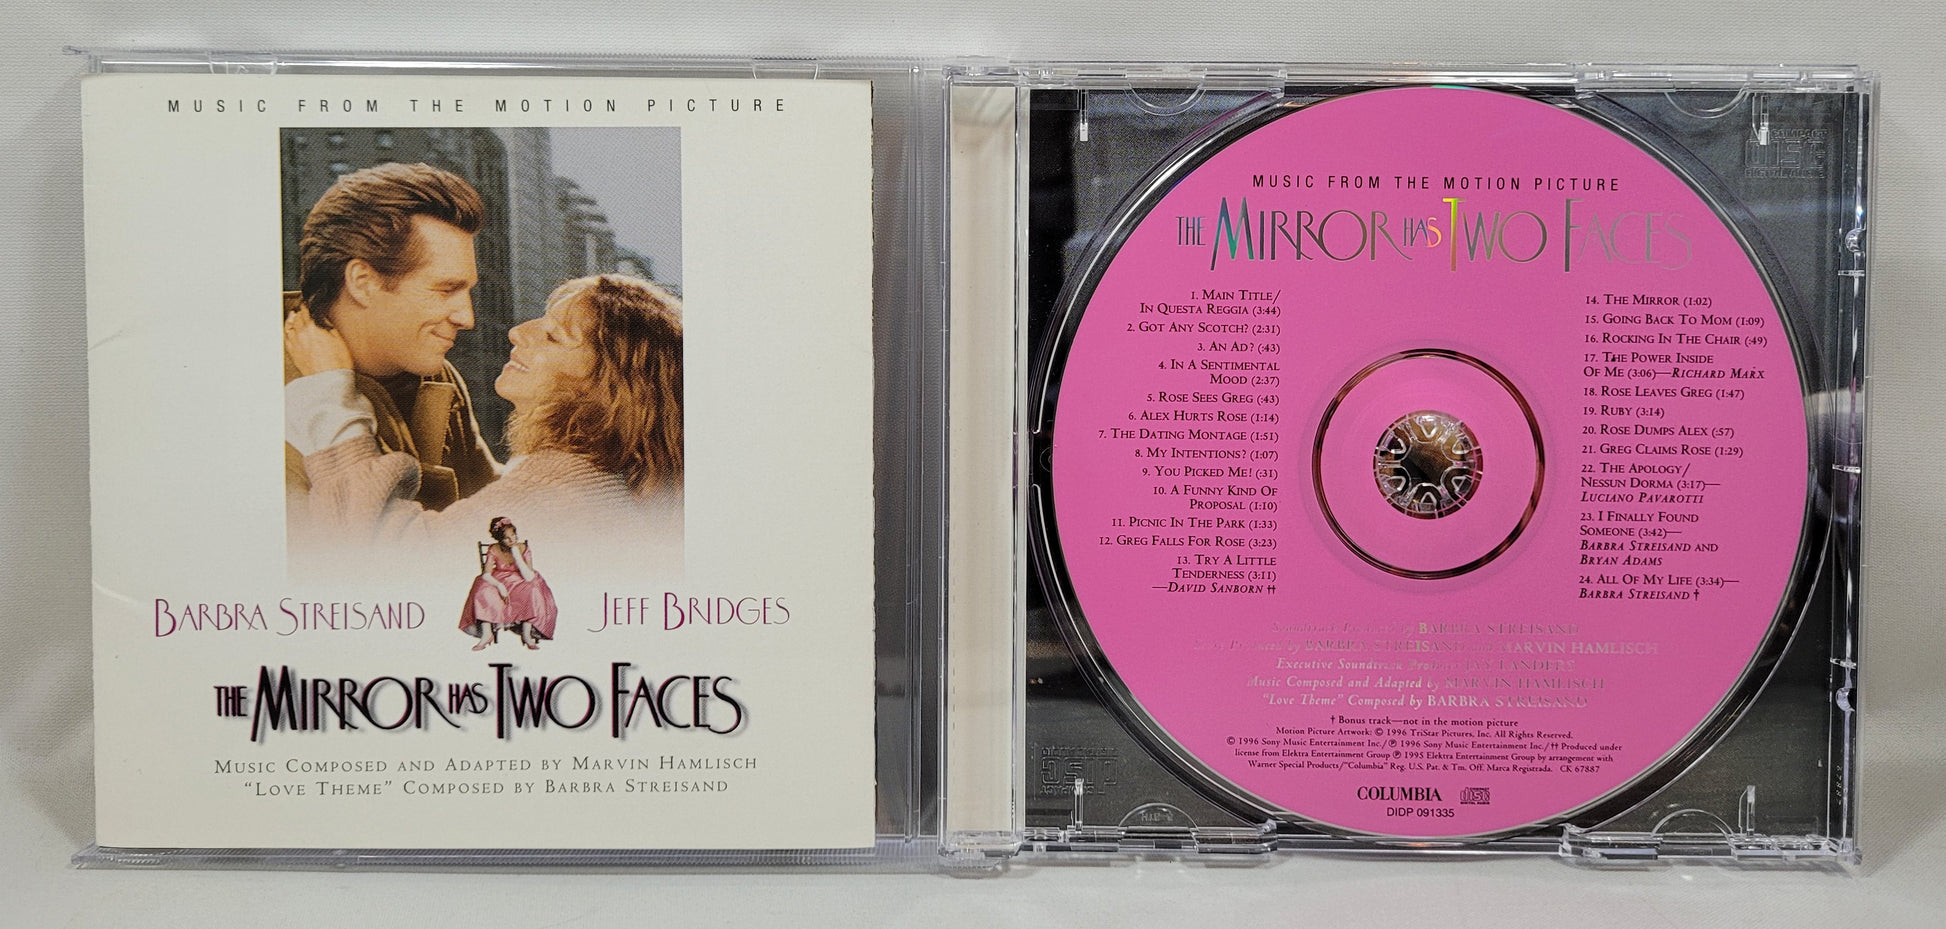 Soundtrack - The Mirror Has Two Faces [1996 Used CD] [C]